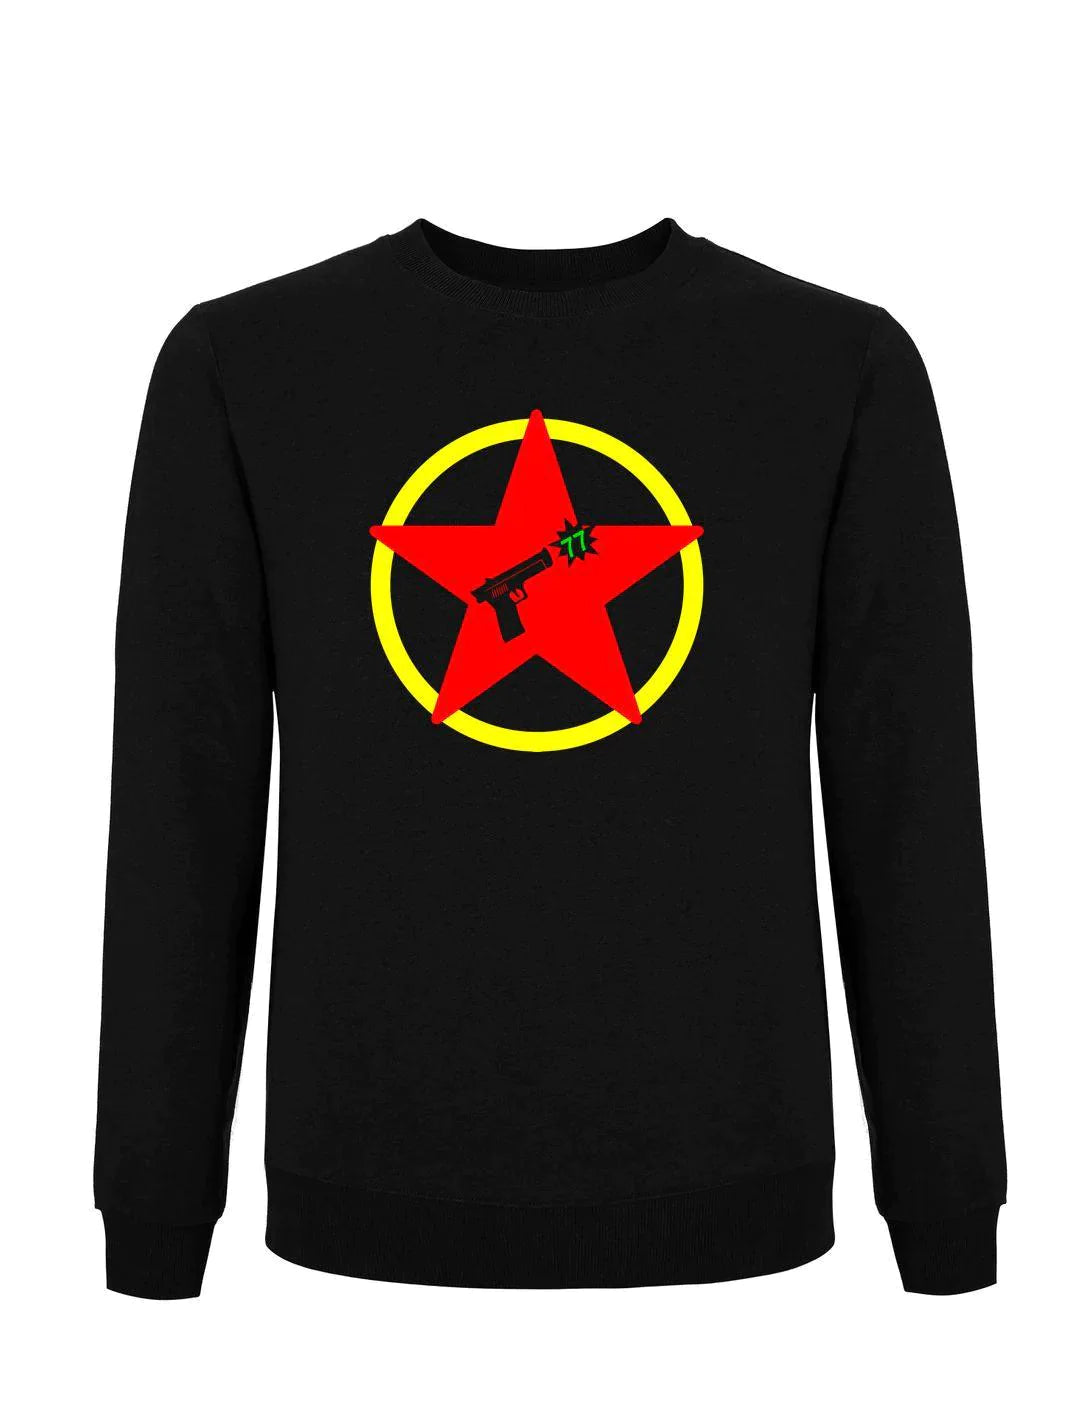 GUNS 77: Sweatshirt Inspired by The Clash - SOUND IS COLOUR